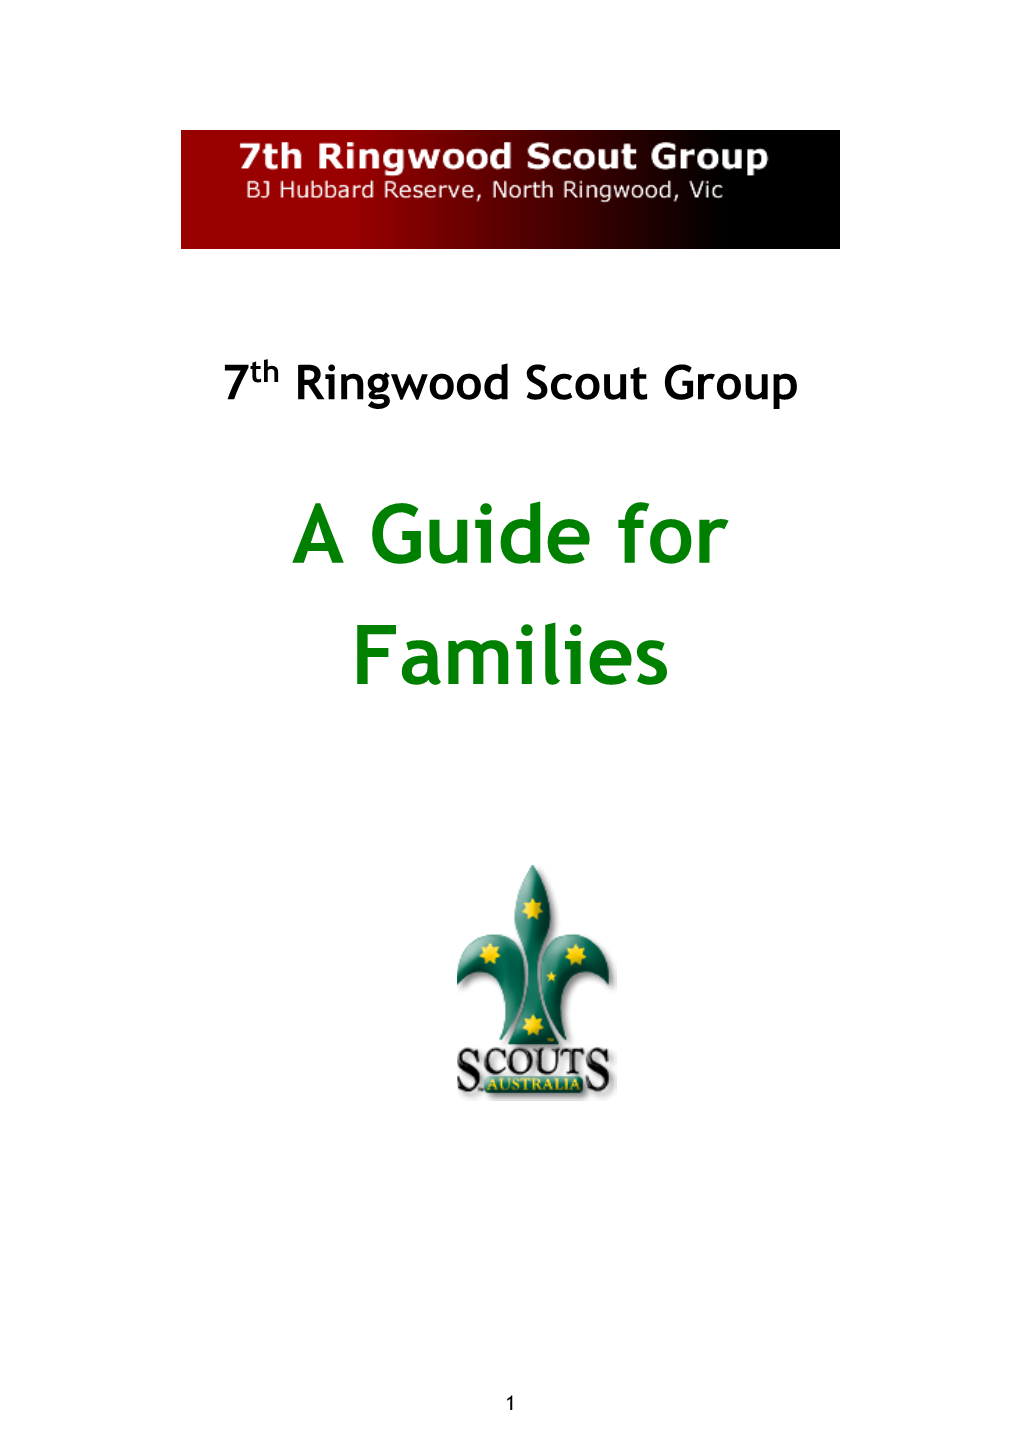 Guide for Families